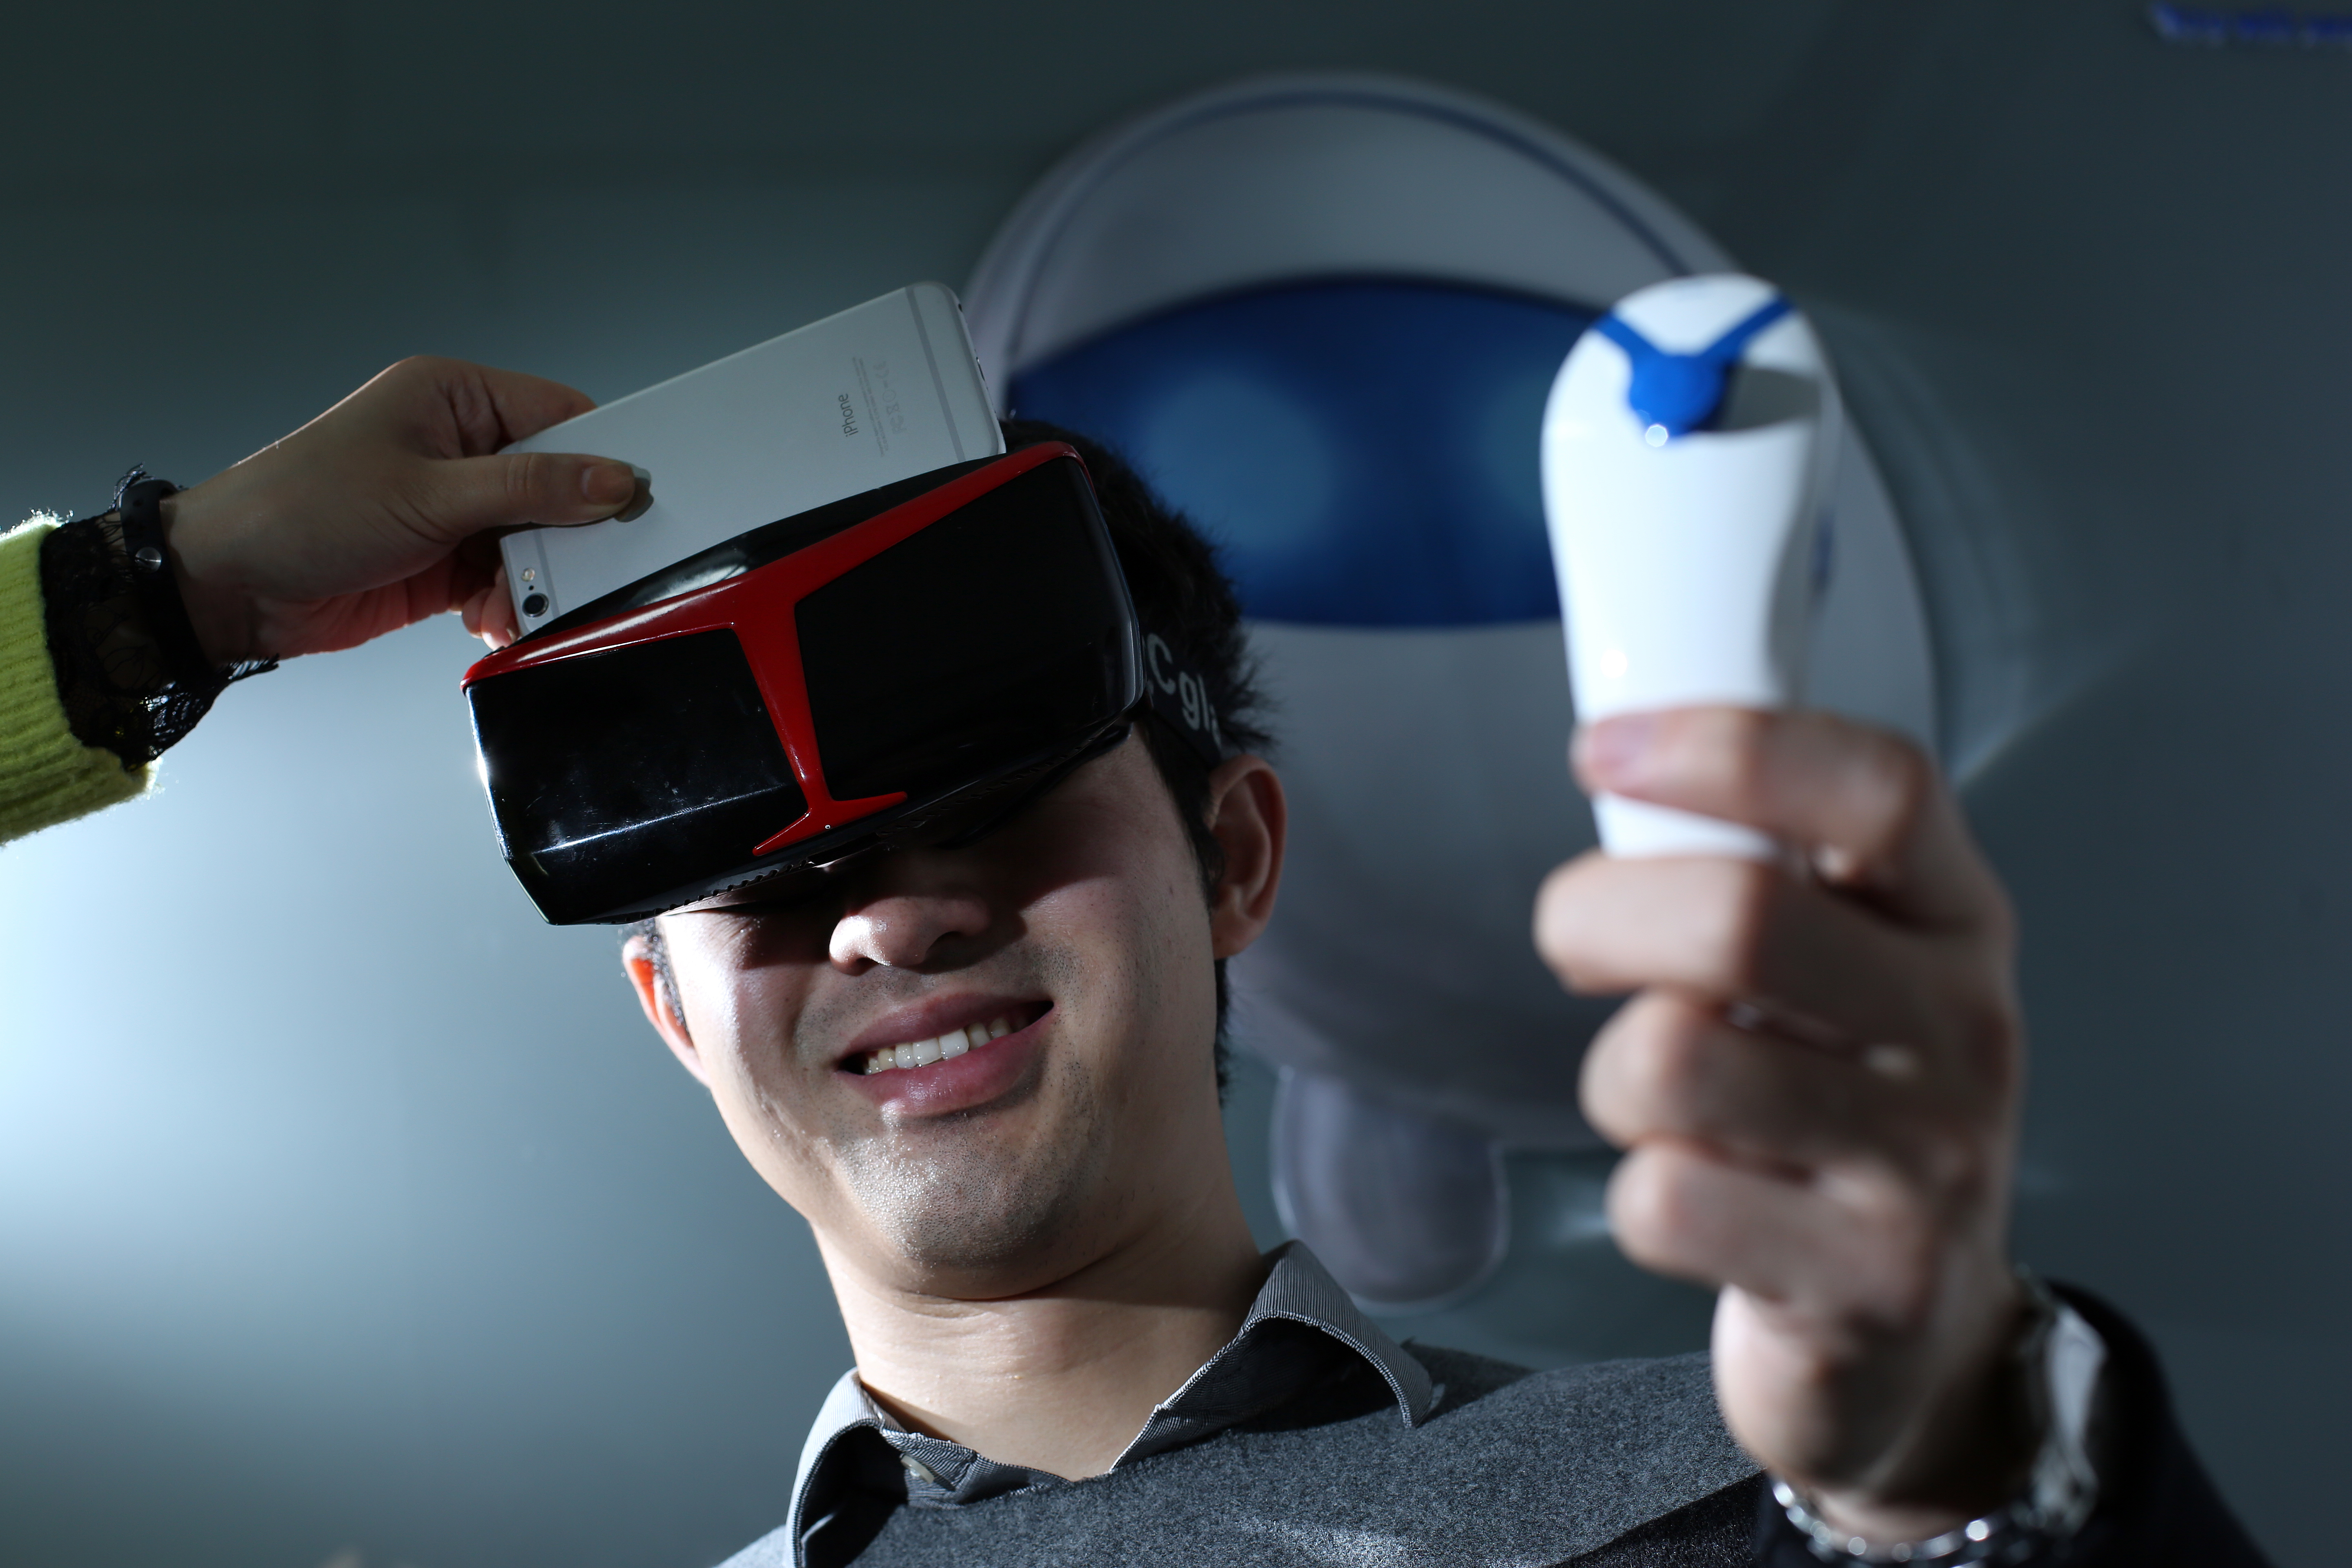 The UC Glass virtual reality headset includes motion sensor feedback as well as a visual display. Photo: Nora Tam